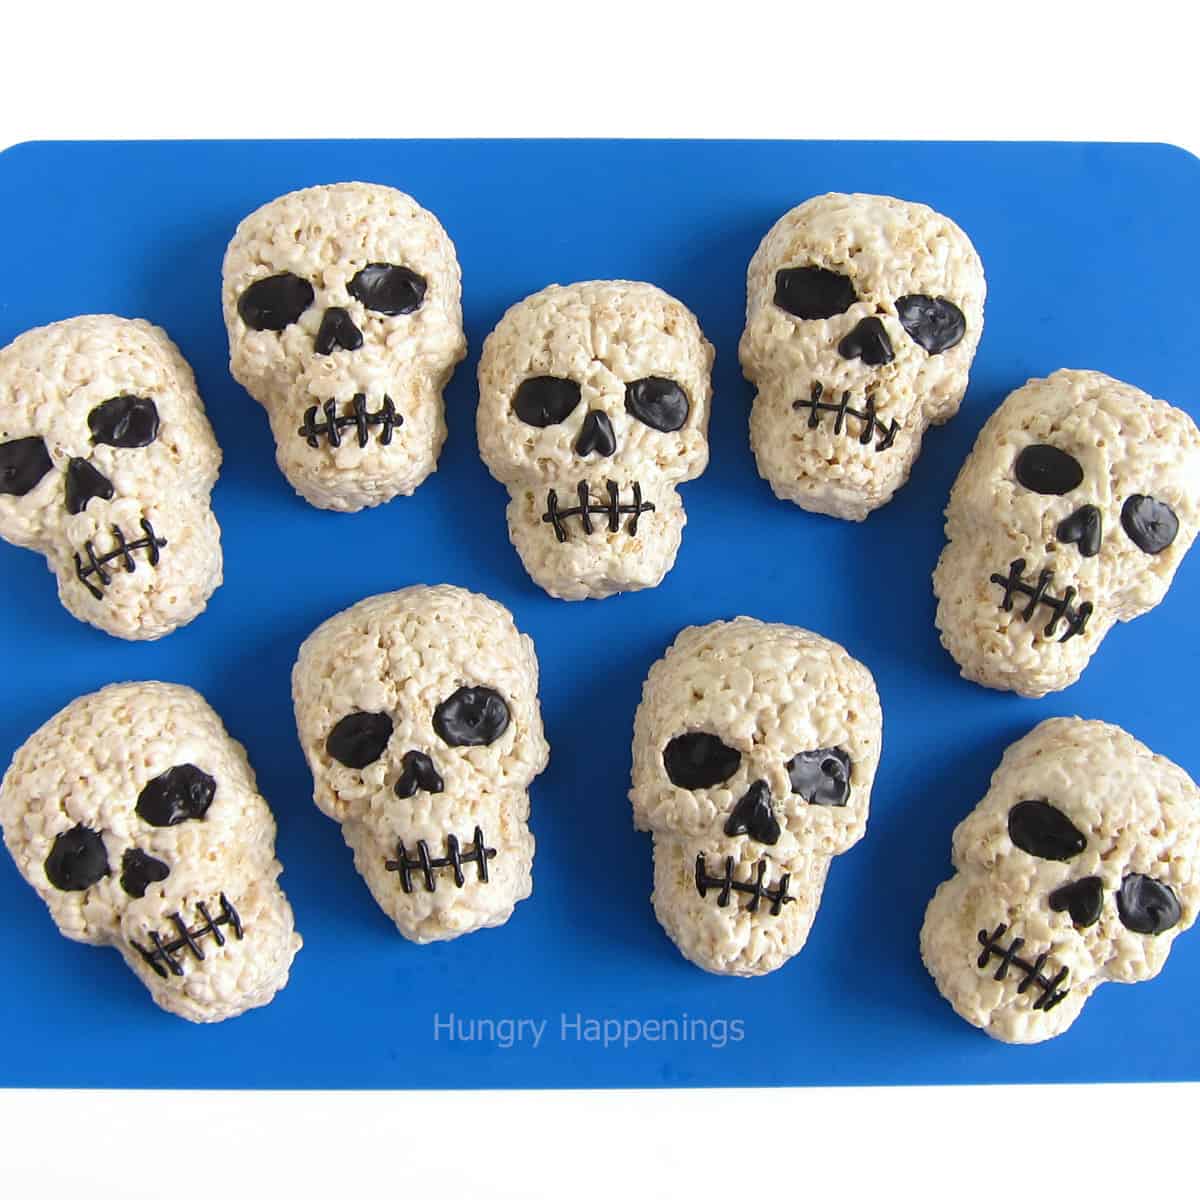 white chocolate rice krispe treat skulls decorated with black eyes, nose, and mouth set on a blue silicone mat.